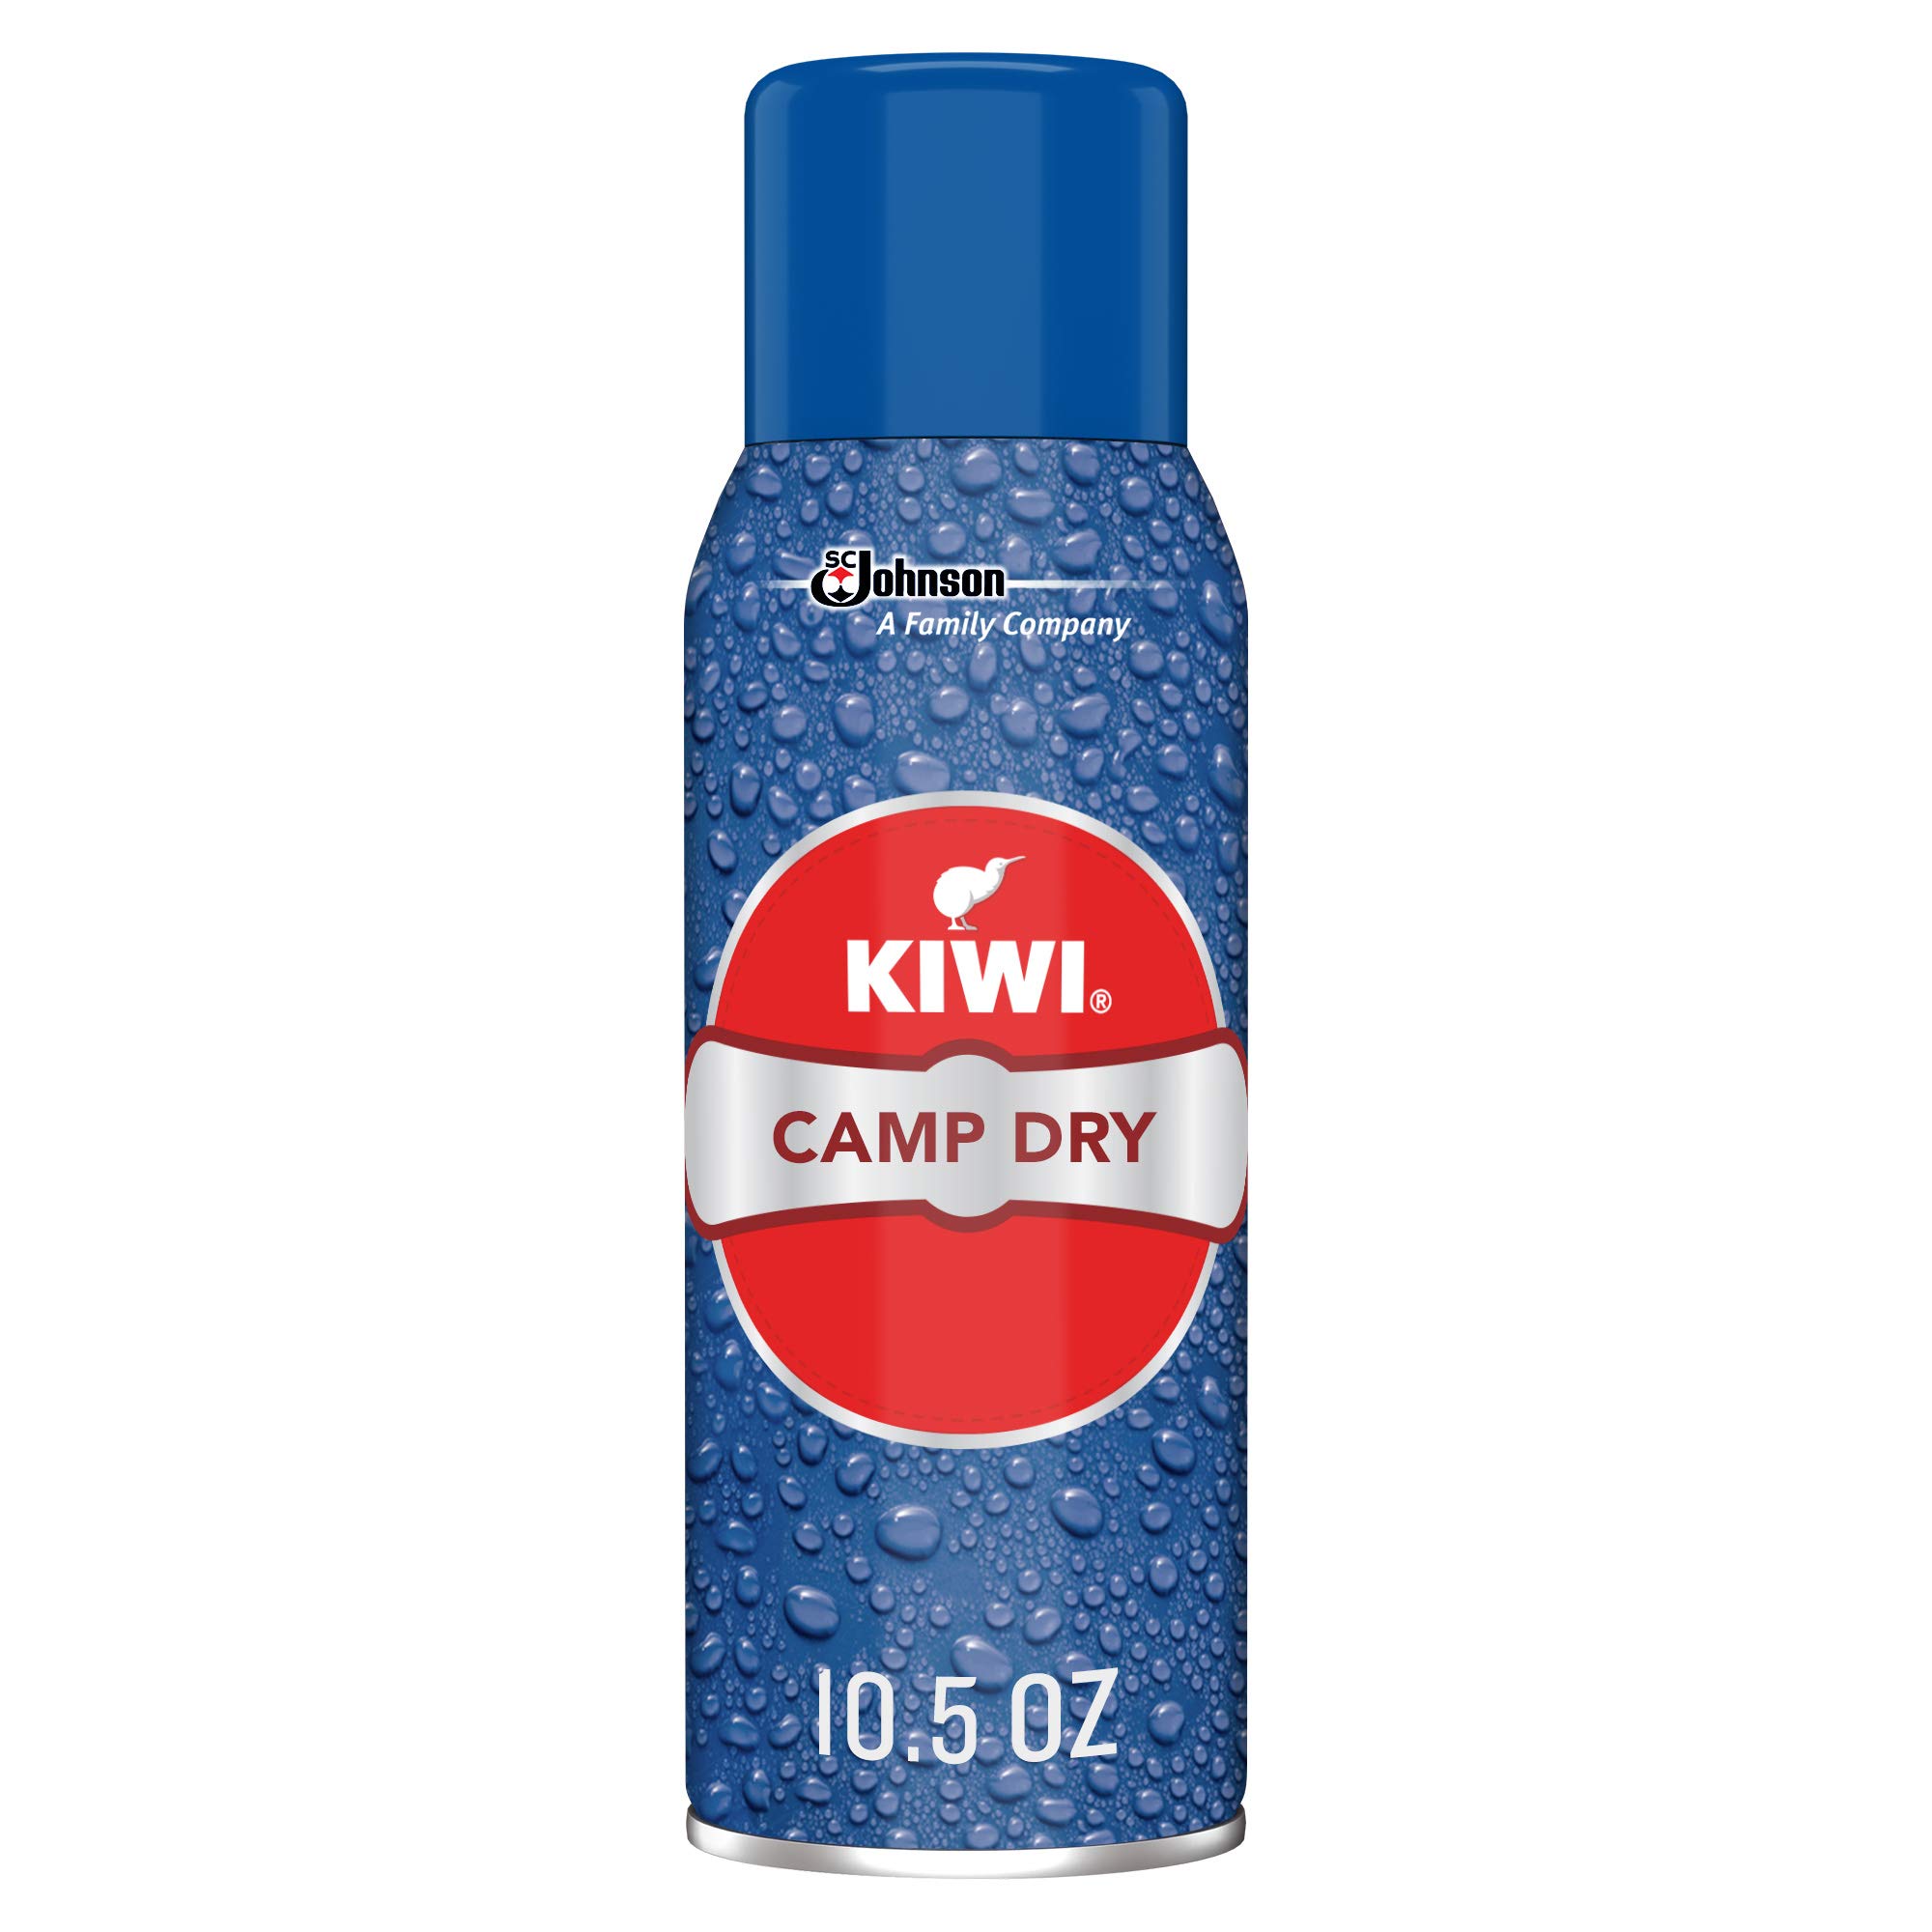 KIWI Camp Dry Fabric Protector (10.5 Ounce (Pack of 1))